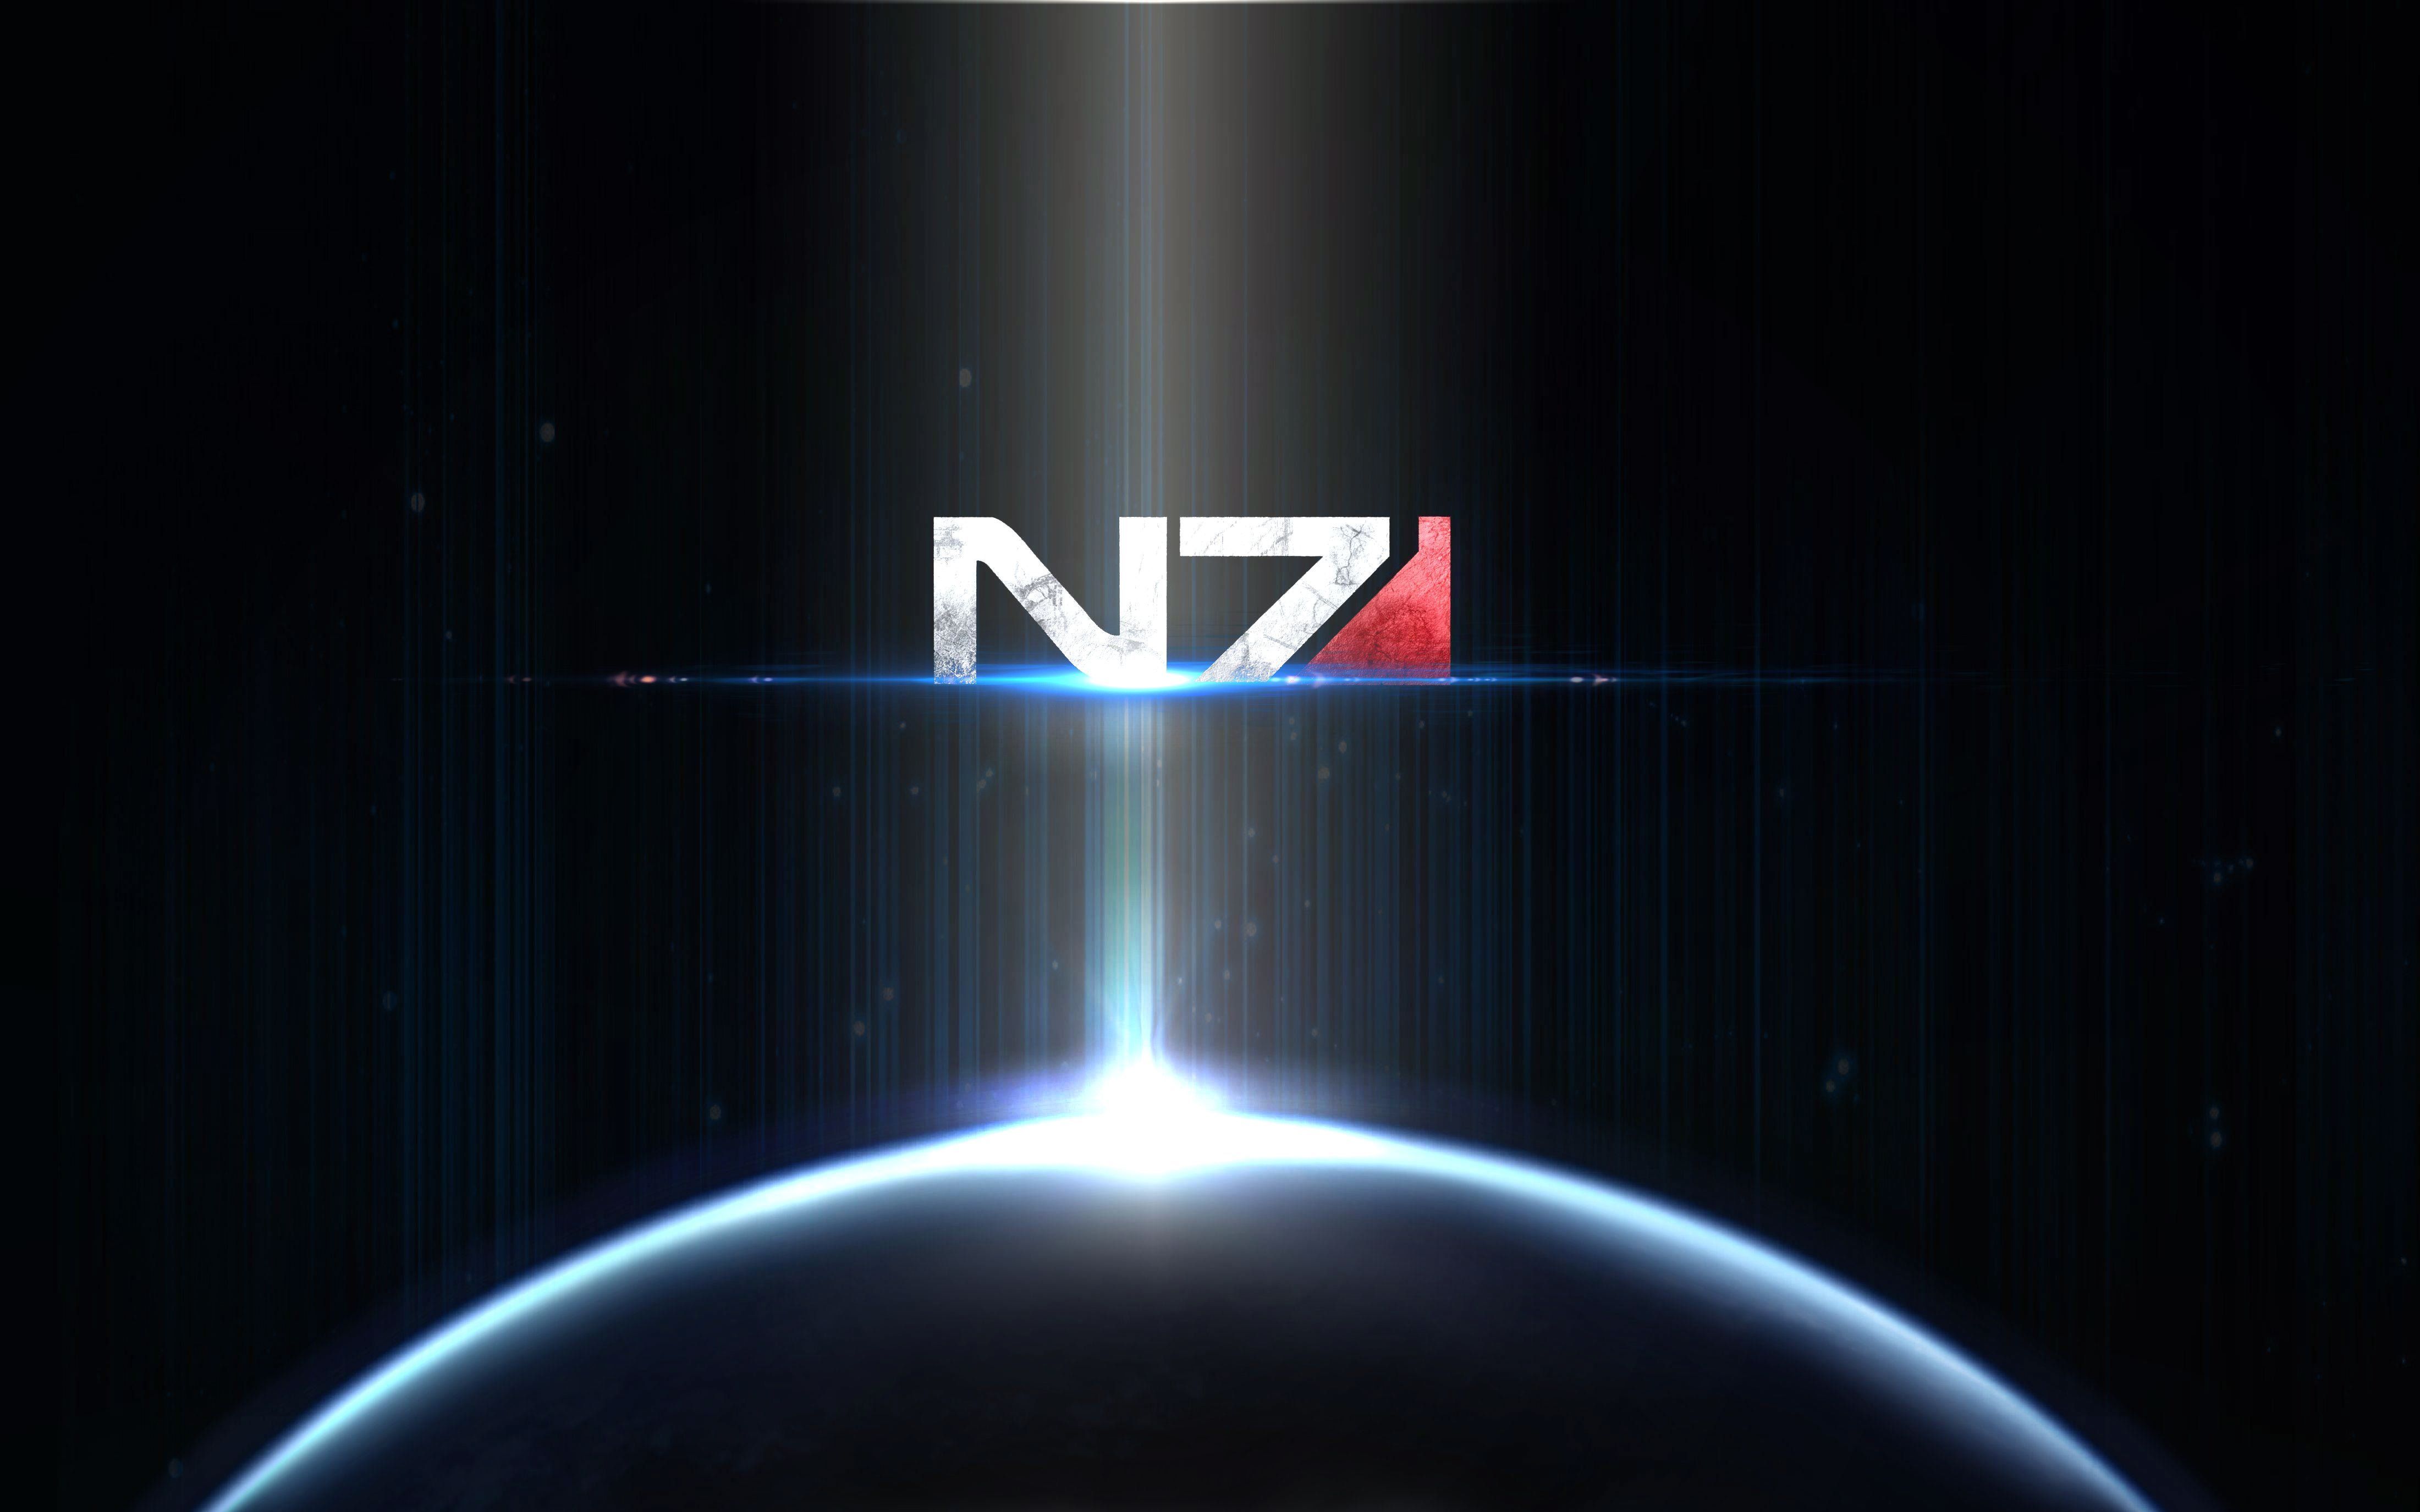 N7 Sign Wallpaper - Happy N7 Day by Euderion on DeviantArt